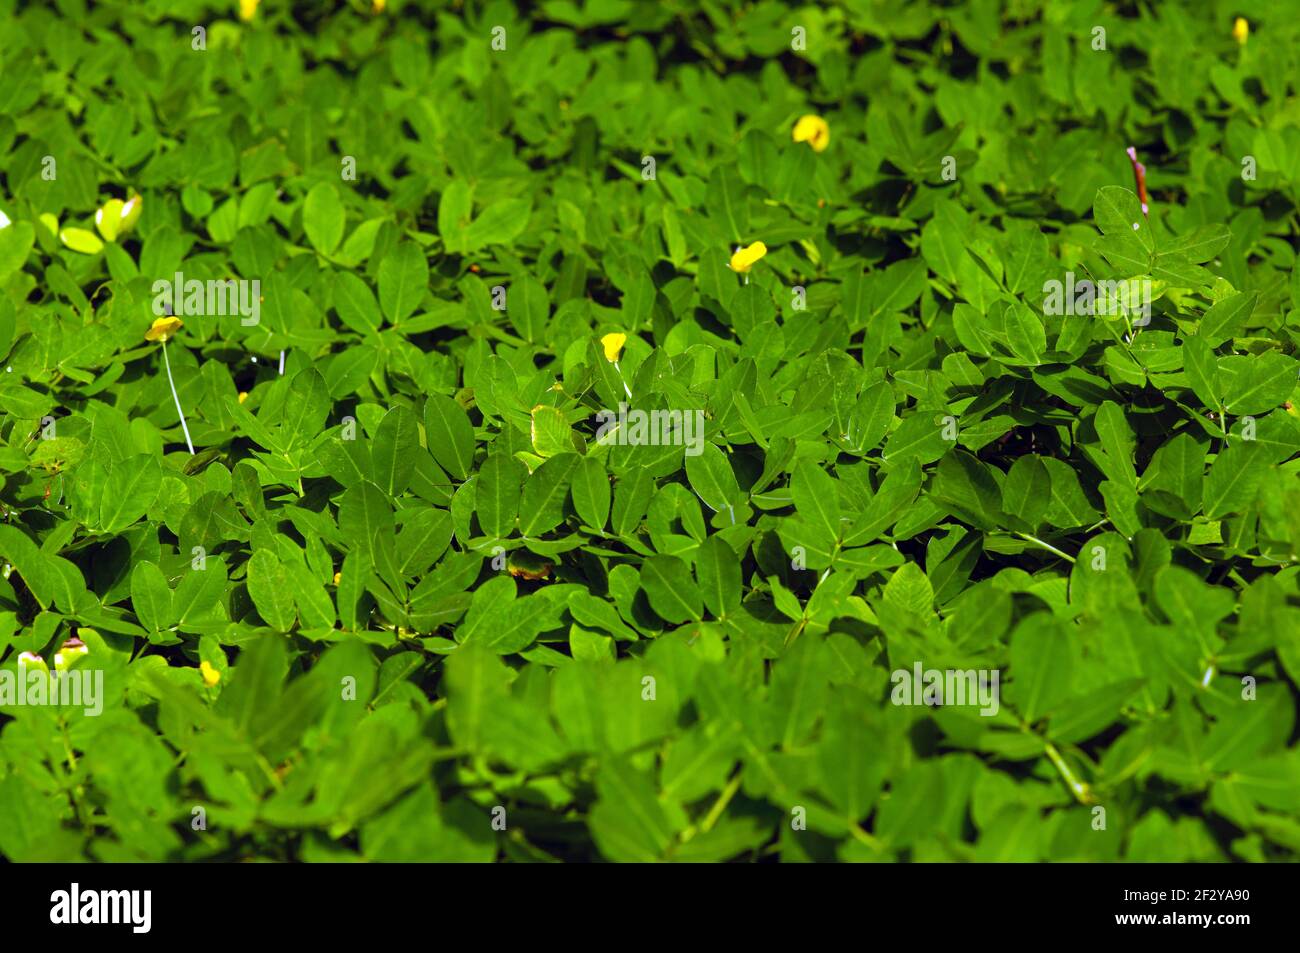 Tiny yellow flowers among green leaves in shallow focus for natural background Stock Photo